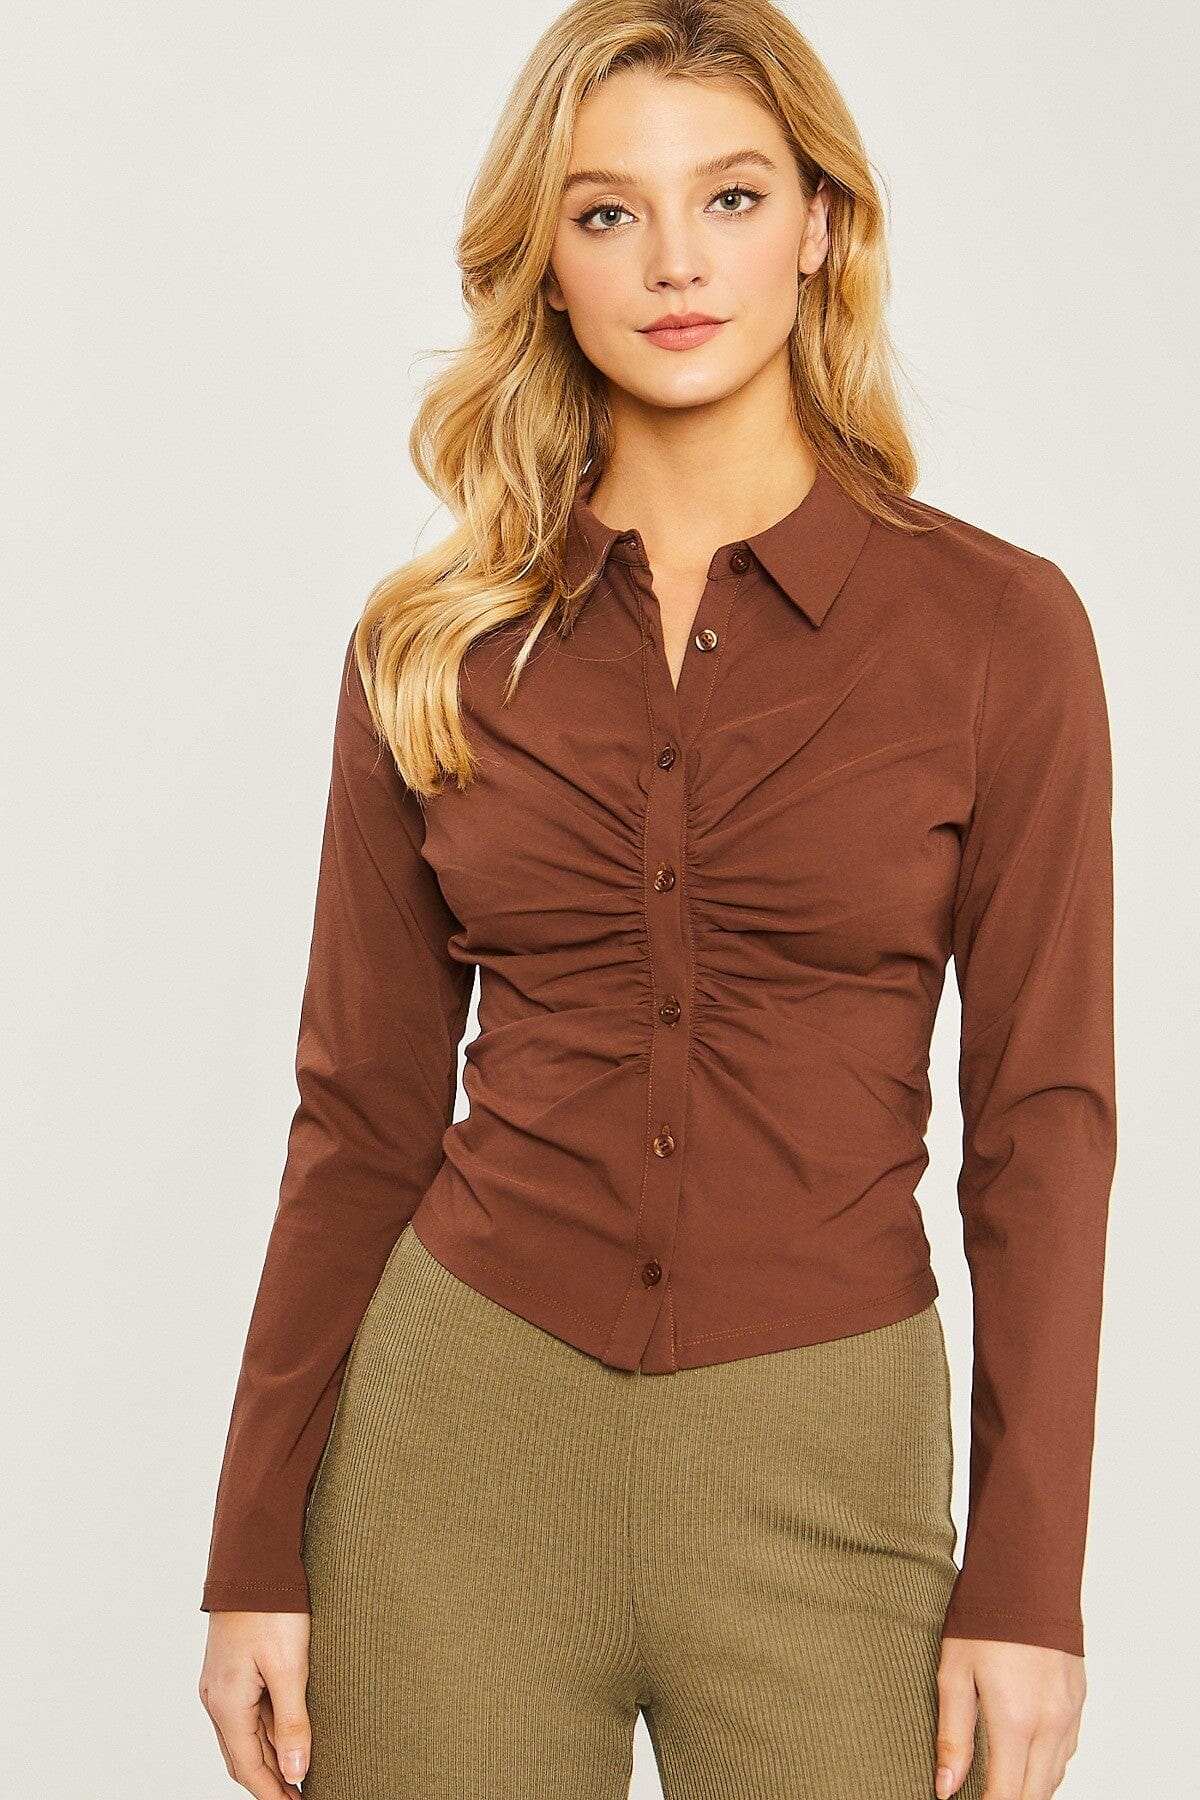 Brown Woven Ruched Front Button Down Collar Long Sleeve Slim Fit Crop Top Shirts Blouse_ Shirts & Tops jehouze 